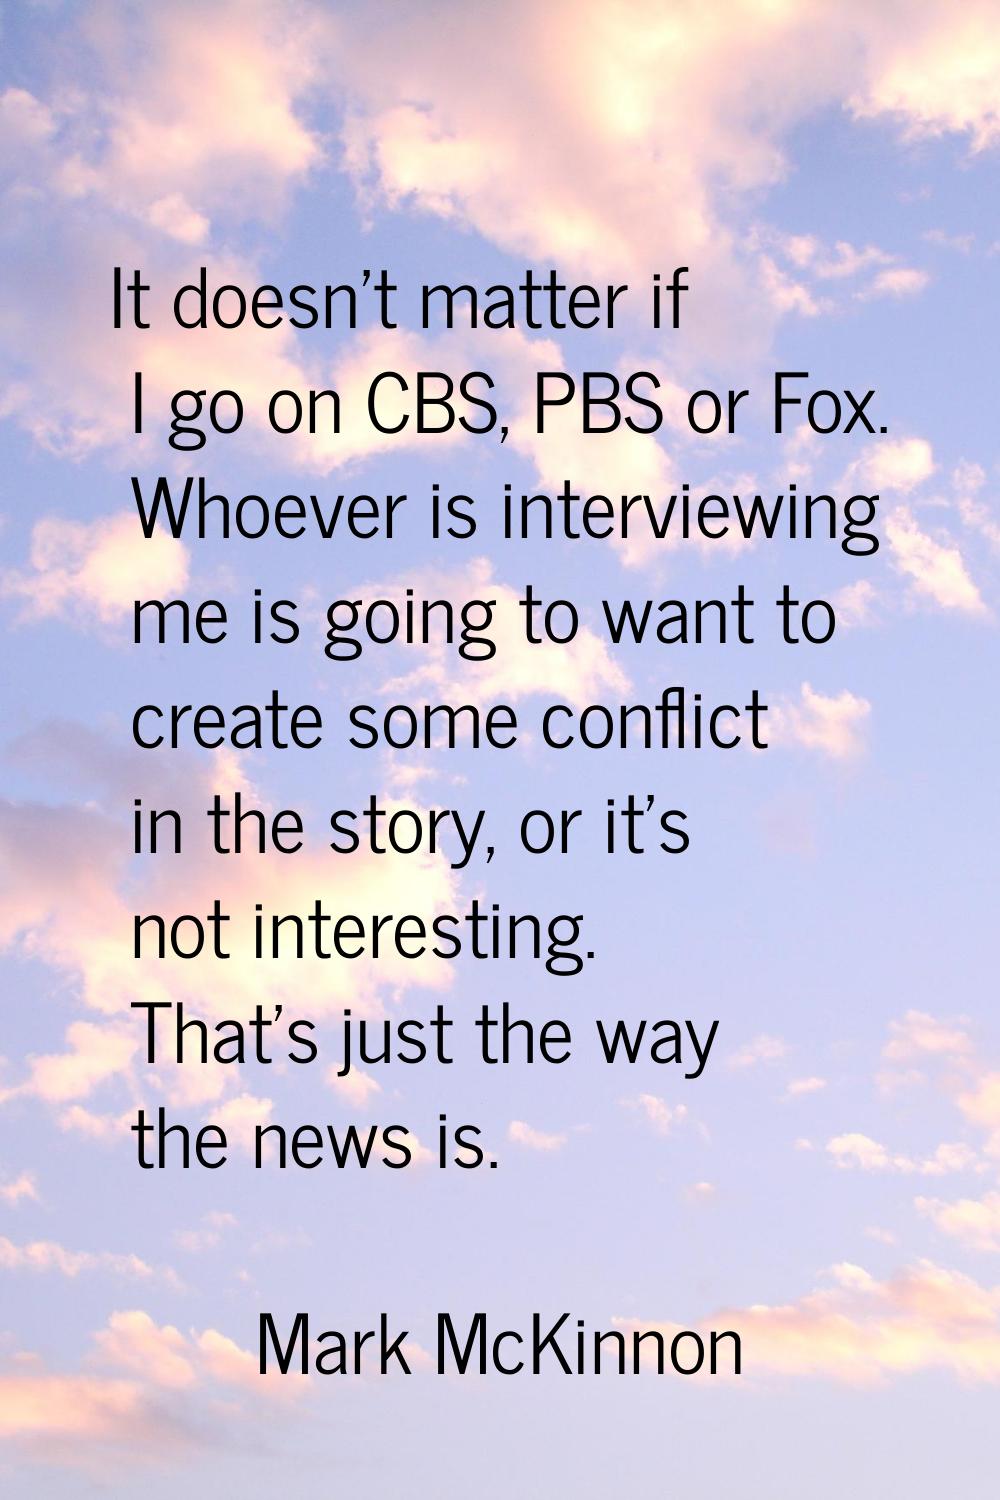 It doesn't matter if I go on CBS, PBS or Fox. Whoever is interviewing me is going to want to create